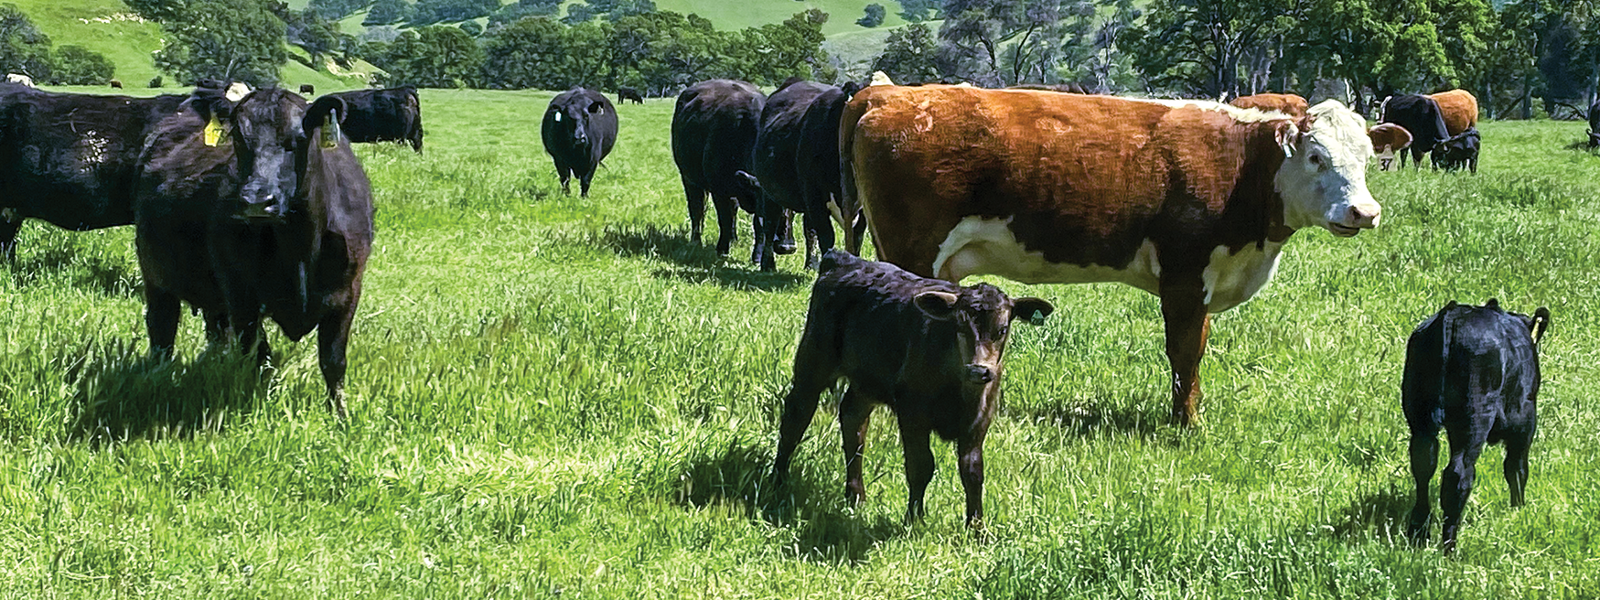 Ranchers look to raise more cattle amid hot market